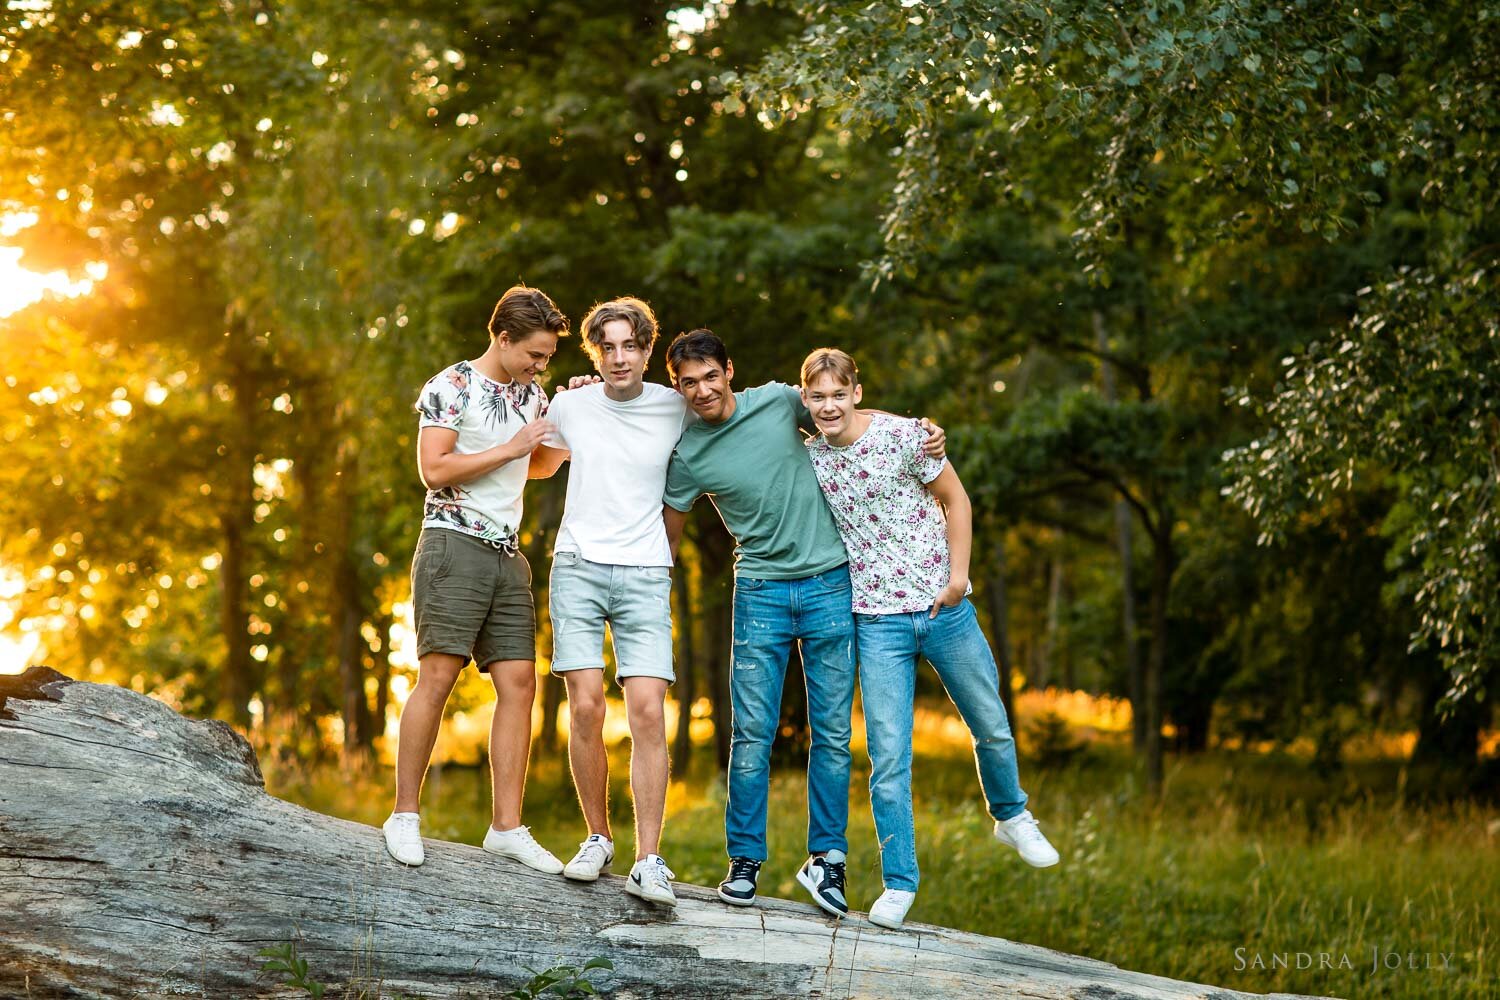 fun-teenage-friends-photo-session-in-stockholm-by-sandra-jolly-photographer.jpg